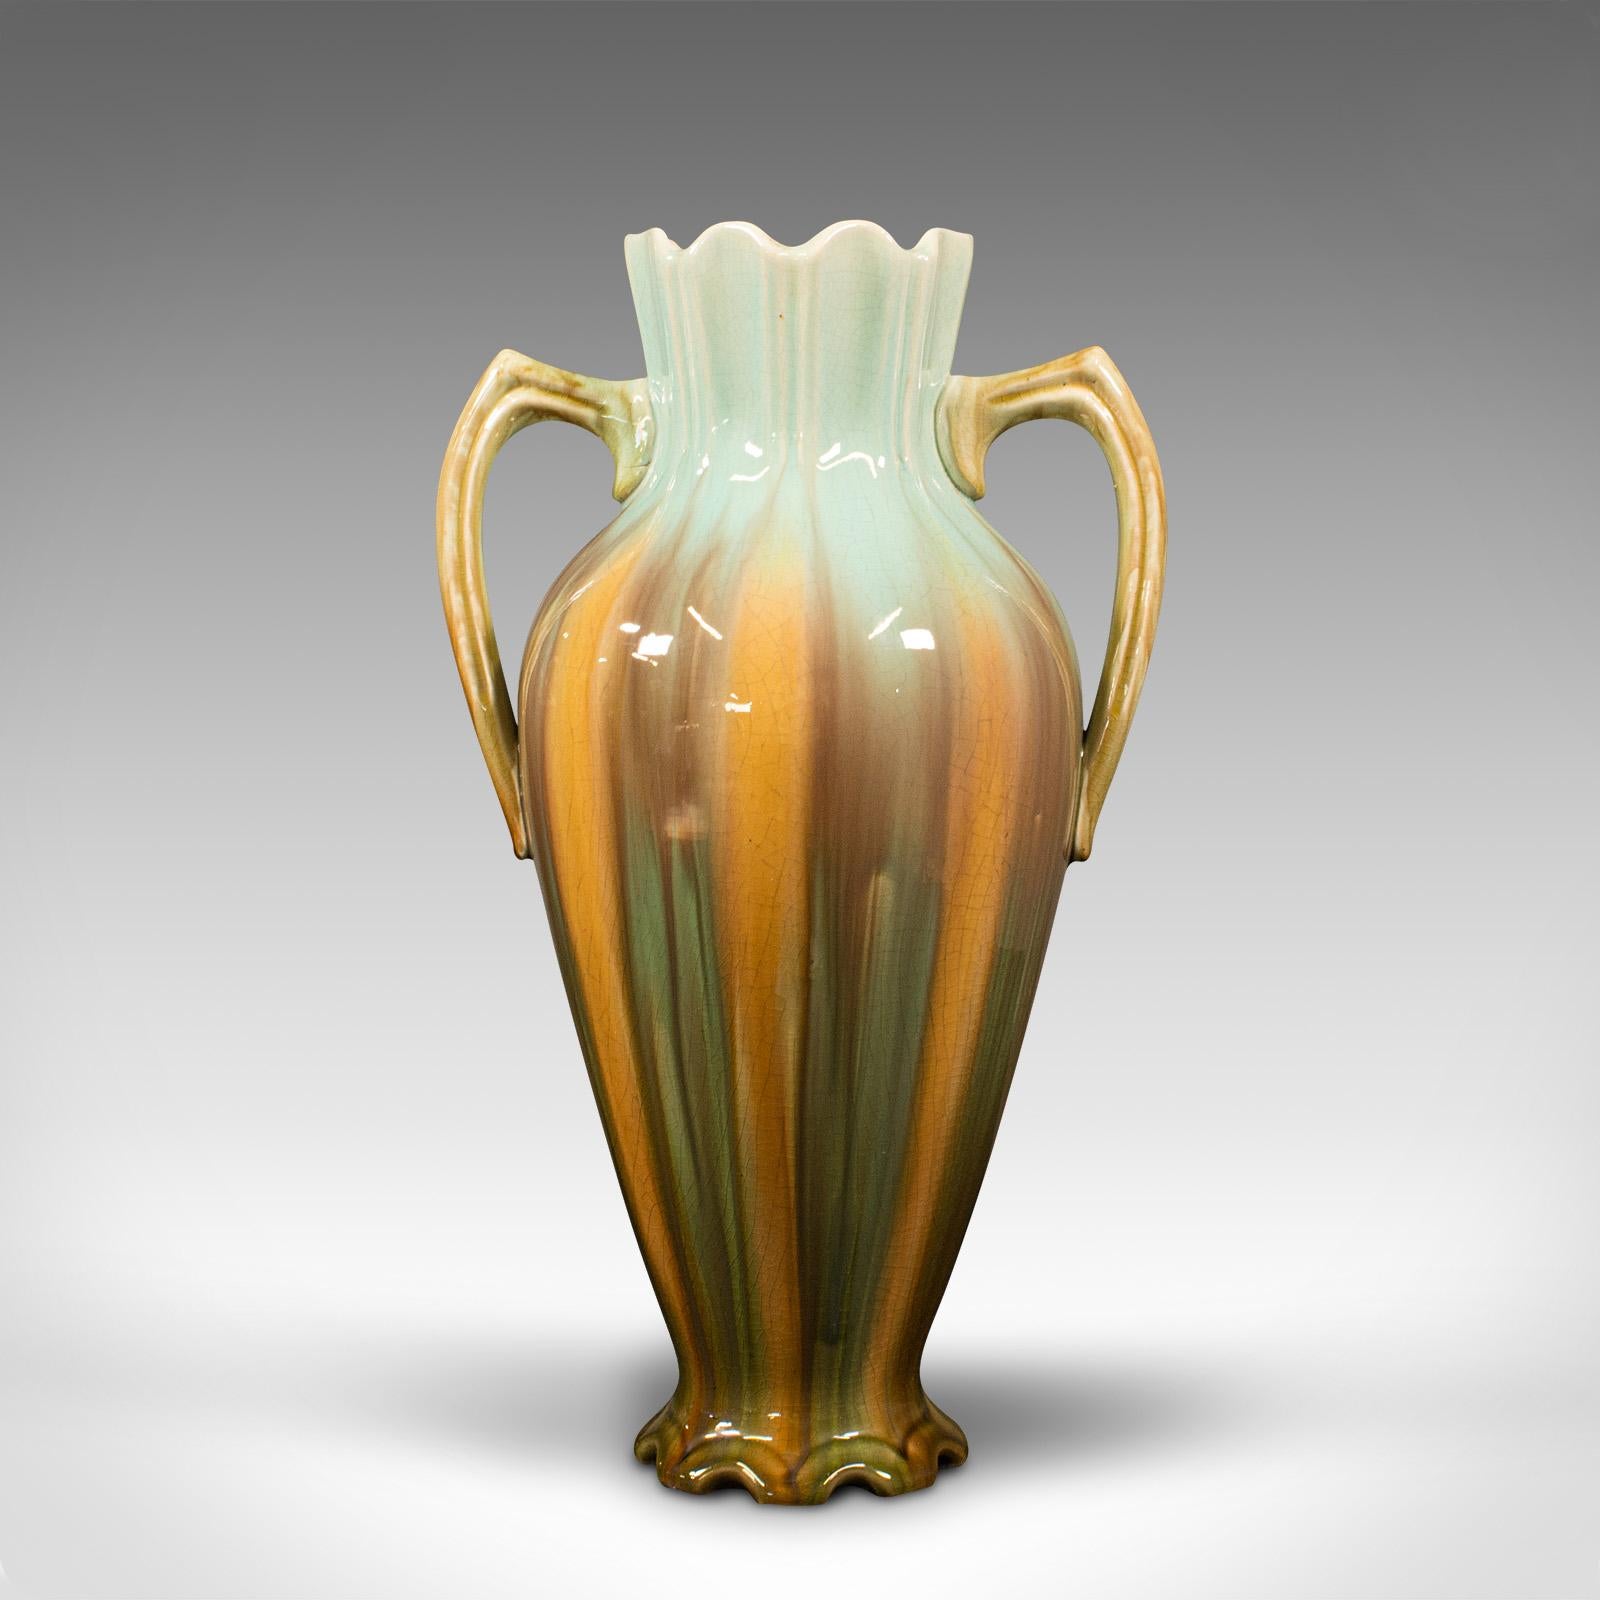 This is an antique decorative vase. A French, ceramic flower urn in Art Nouveau taste, dating to the late Victorian period, circa 1900.

Appealing colors and distinctive foliate form
Displays a desirable aged patina and in good order
Ceramic